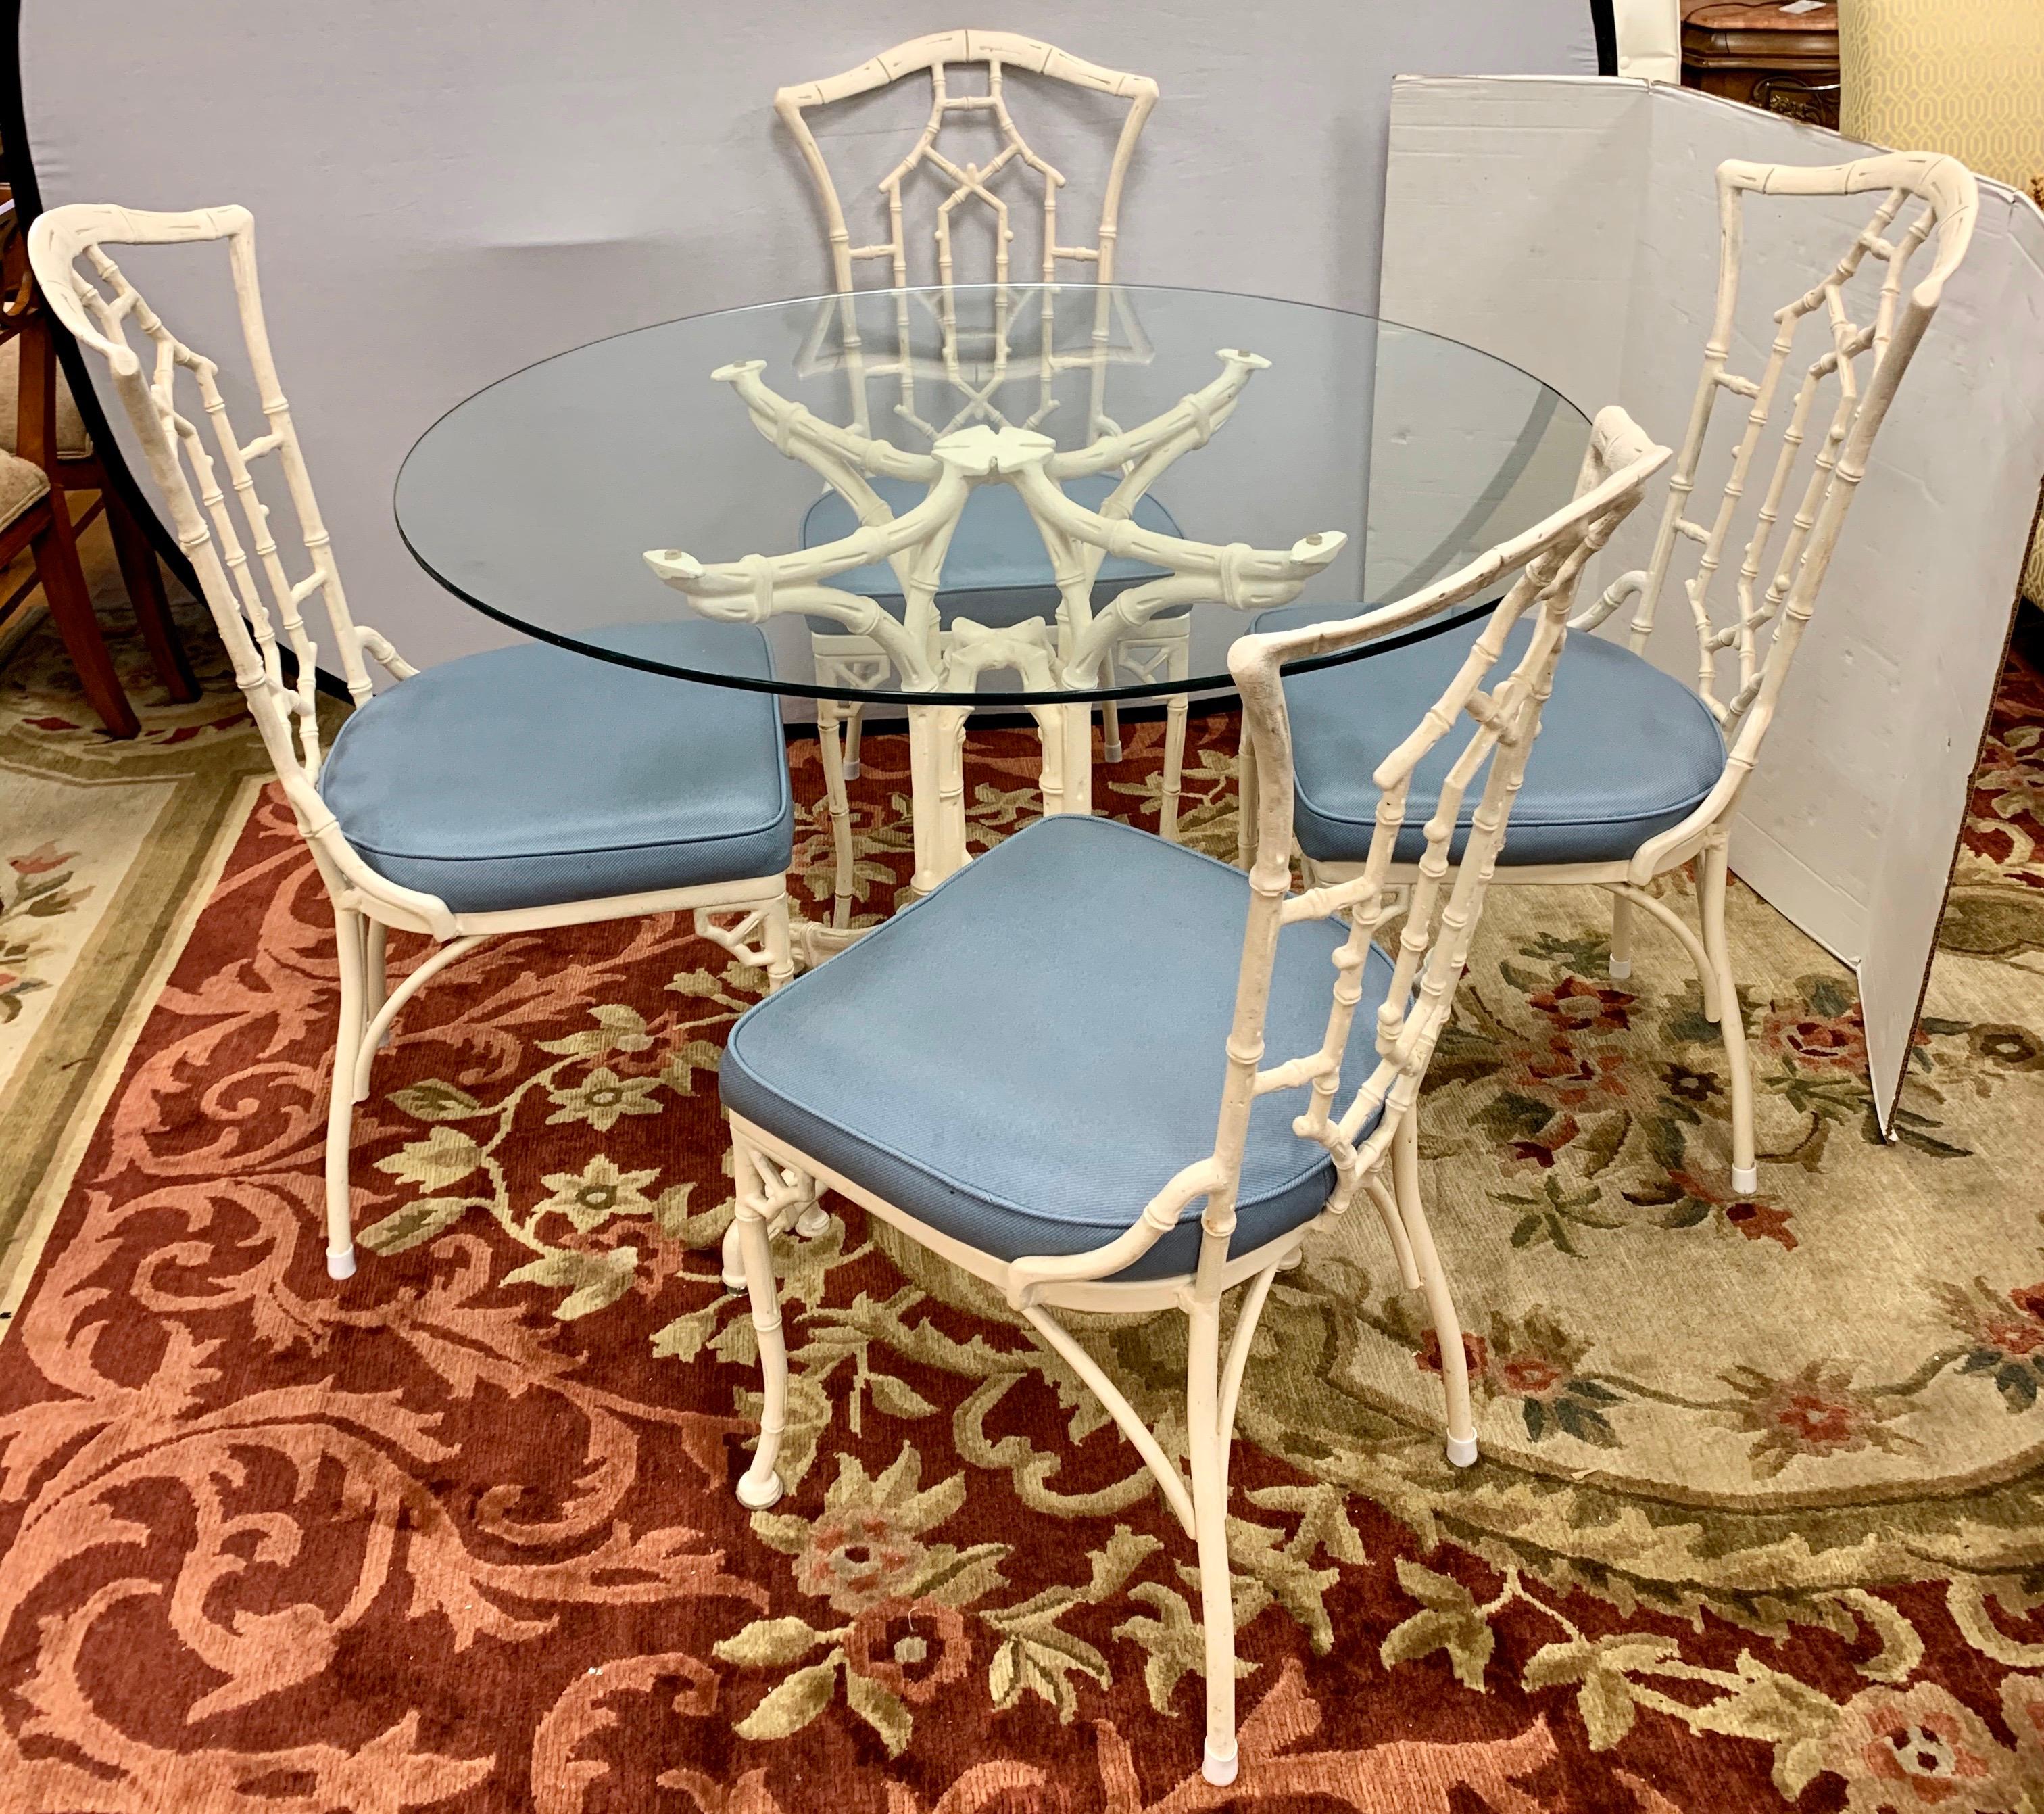 Magnificent Mid-Century Modern 5 pc. Chinese Chippendale cast aluminum and glass dining or dinette
set with a table and four matching chairs. The chairs have the coveted pagoda carving in the backrest and the upholstered seat cushions are tiffany